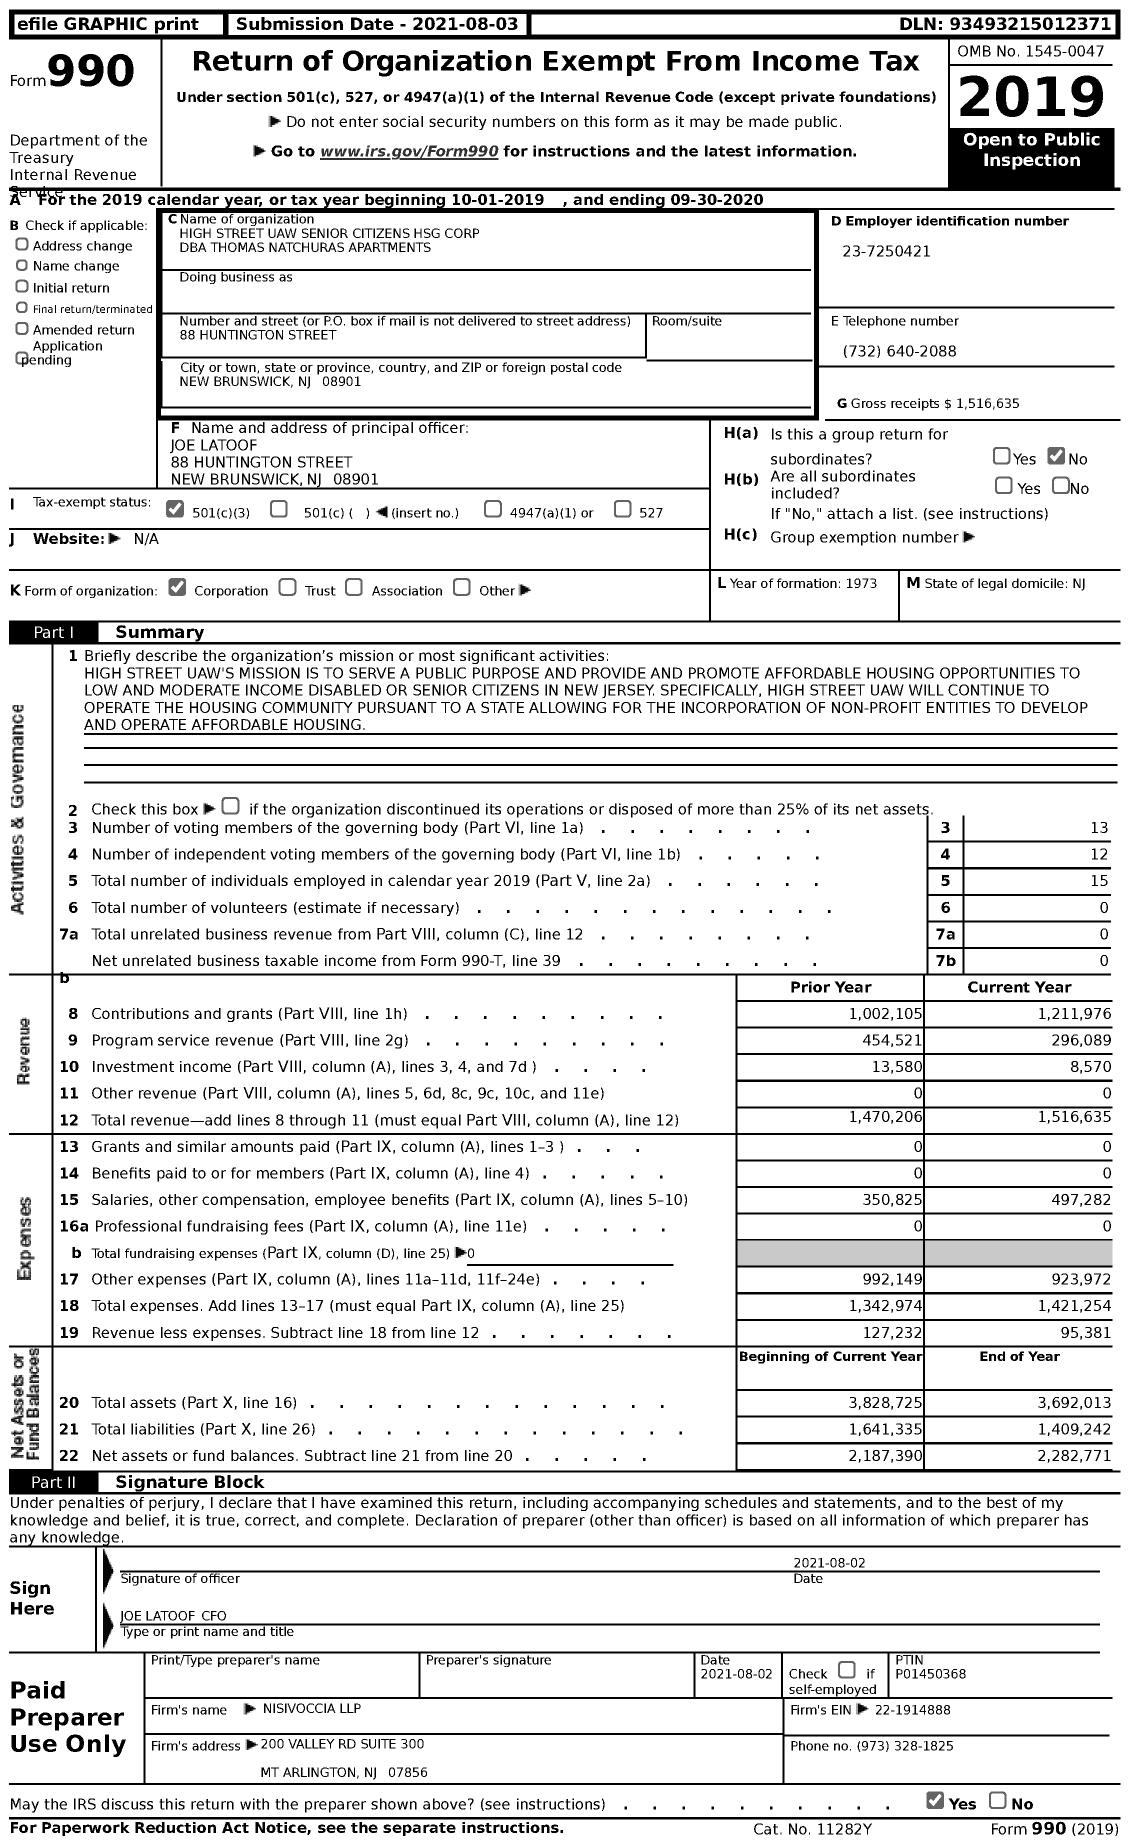 Image of first page of 2019 Form 990 for Thomas Natchuras Apartments